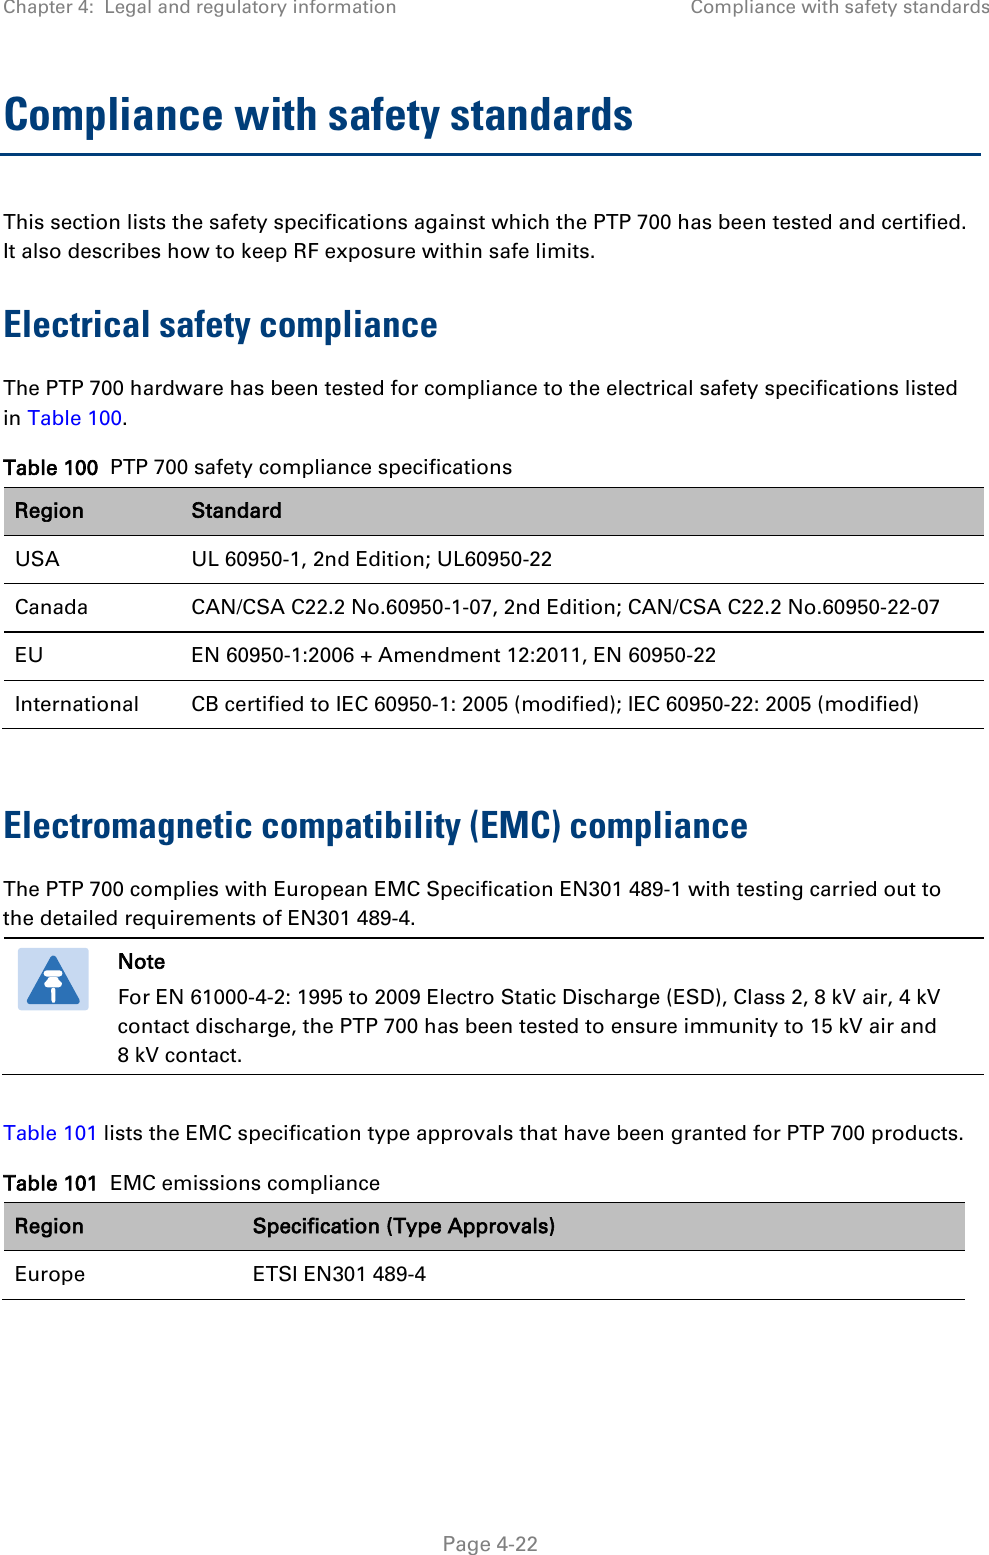 Chapter 4:  Legal and regulatory information Compliance with safety standards  Compliance with safety standards This section lists the safety specifications against which the PTP 700 has been tested and certified. It also describes how to keep RF exposure within safe limits. Electrical safety compliance  The PTP 700 hardware has been tested for compliance to the electrical safety specifications listed in Table 100. Table 100  PTP 700 safety compliance specifications Region Standard USA UL 60950-1, 2nd Edition; UL60950-22 Canada CAN/CSA C22.2 No.60950-1-07, 2nd Edition; CAN/CSA C22.2 No.60950-22-07 EU EN 60950-1:2006 + Amendment 12:2011, EN 60950-22 International CB certified to IEC 60950-1: 2005 (modified); IEC 60950-22: 2005 (modified)  Electromagnetic compatibility (EMC) compliance The PTP 700 complies with European EMC Specification EN301 489-1 with testing carried out to the detailed requirements of EN301 489-4.   Note For EN 61000-4-2: 1995 to 2009 Electro Static Discharge (ESD), Class 2, 8 kV air, 4 kV contact discharge, the PTP 700 has been tested to ensure immunity to 15 kV air and 8 kV contact.  Table 101 lists the EMC specification type approvals that have been granted for PTP 700 products. Table 101  EMC emissions compliance Region Specification (Type Approvals) Europe ETSI EN301 489-4   Page 4-22 